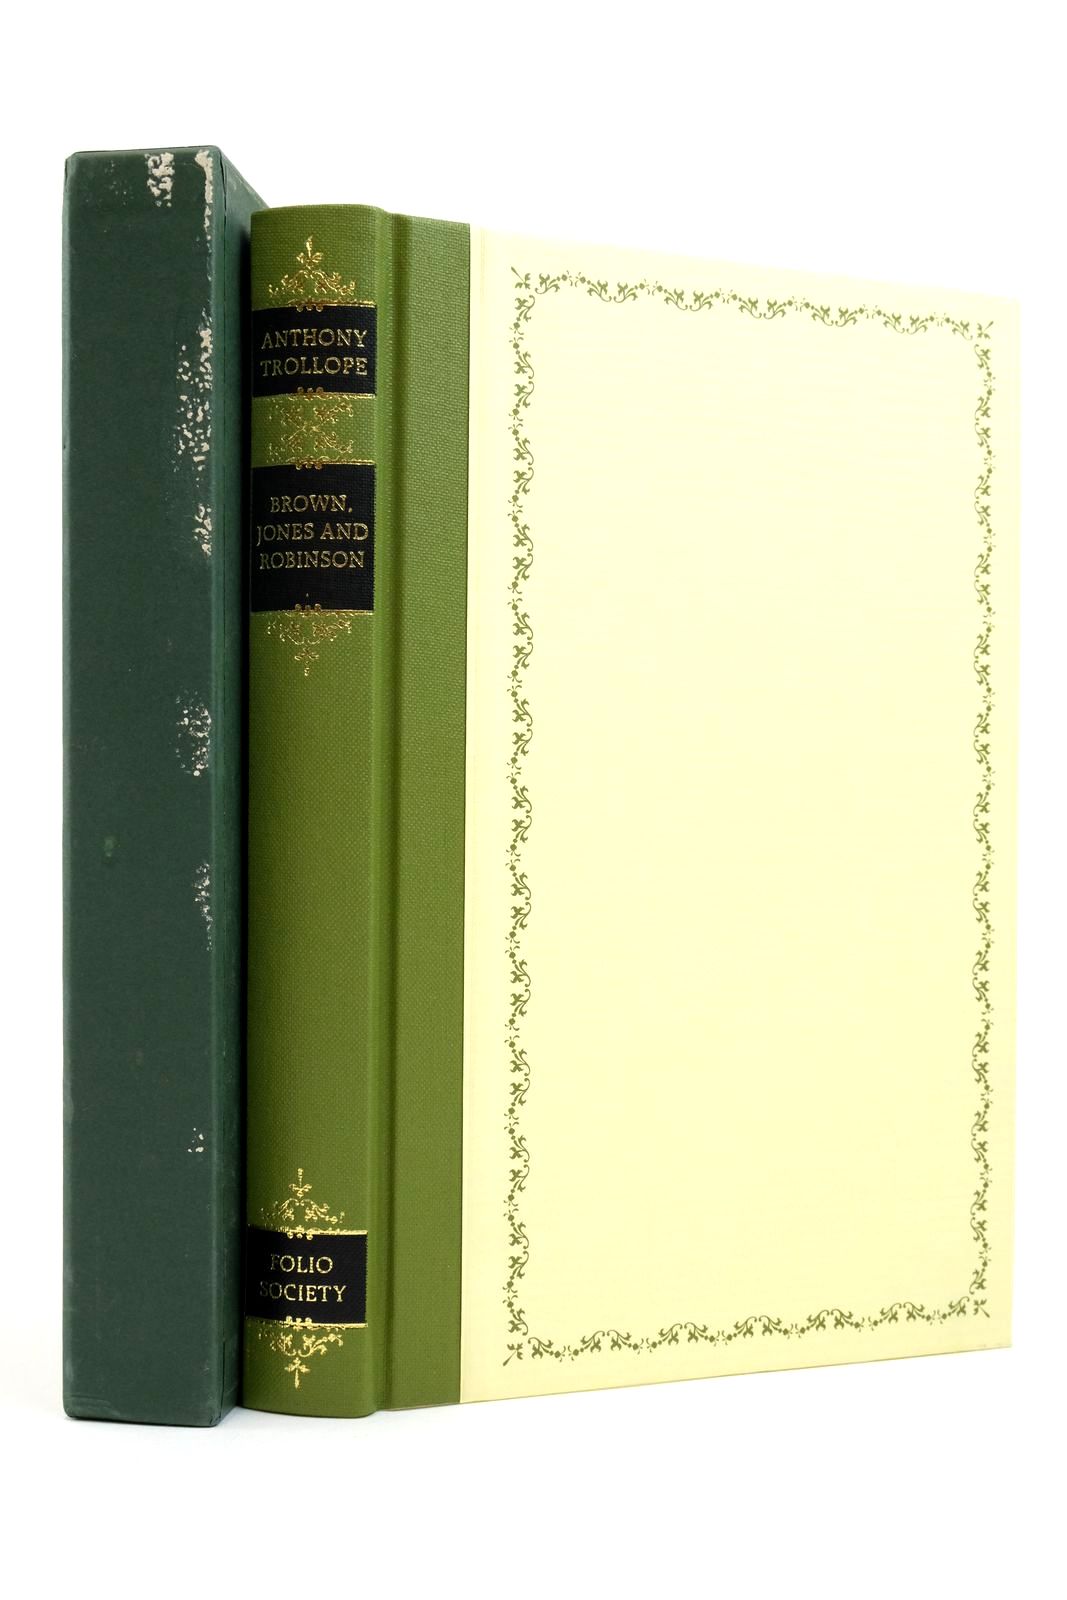 Photo of THE STRUGGLES OF BROWN, JONES AND ROBINSON written by Trollope, Anthony illustrated by Thomas, Llewellyn published by Folio Society (STOCK CODE: 2138421)  for sale by Stella & Rose's Books